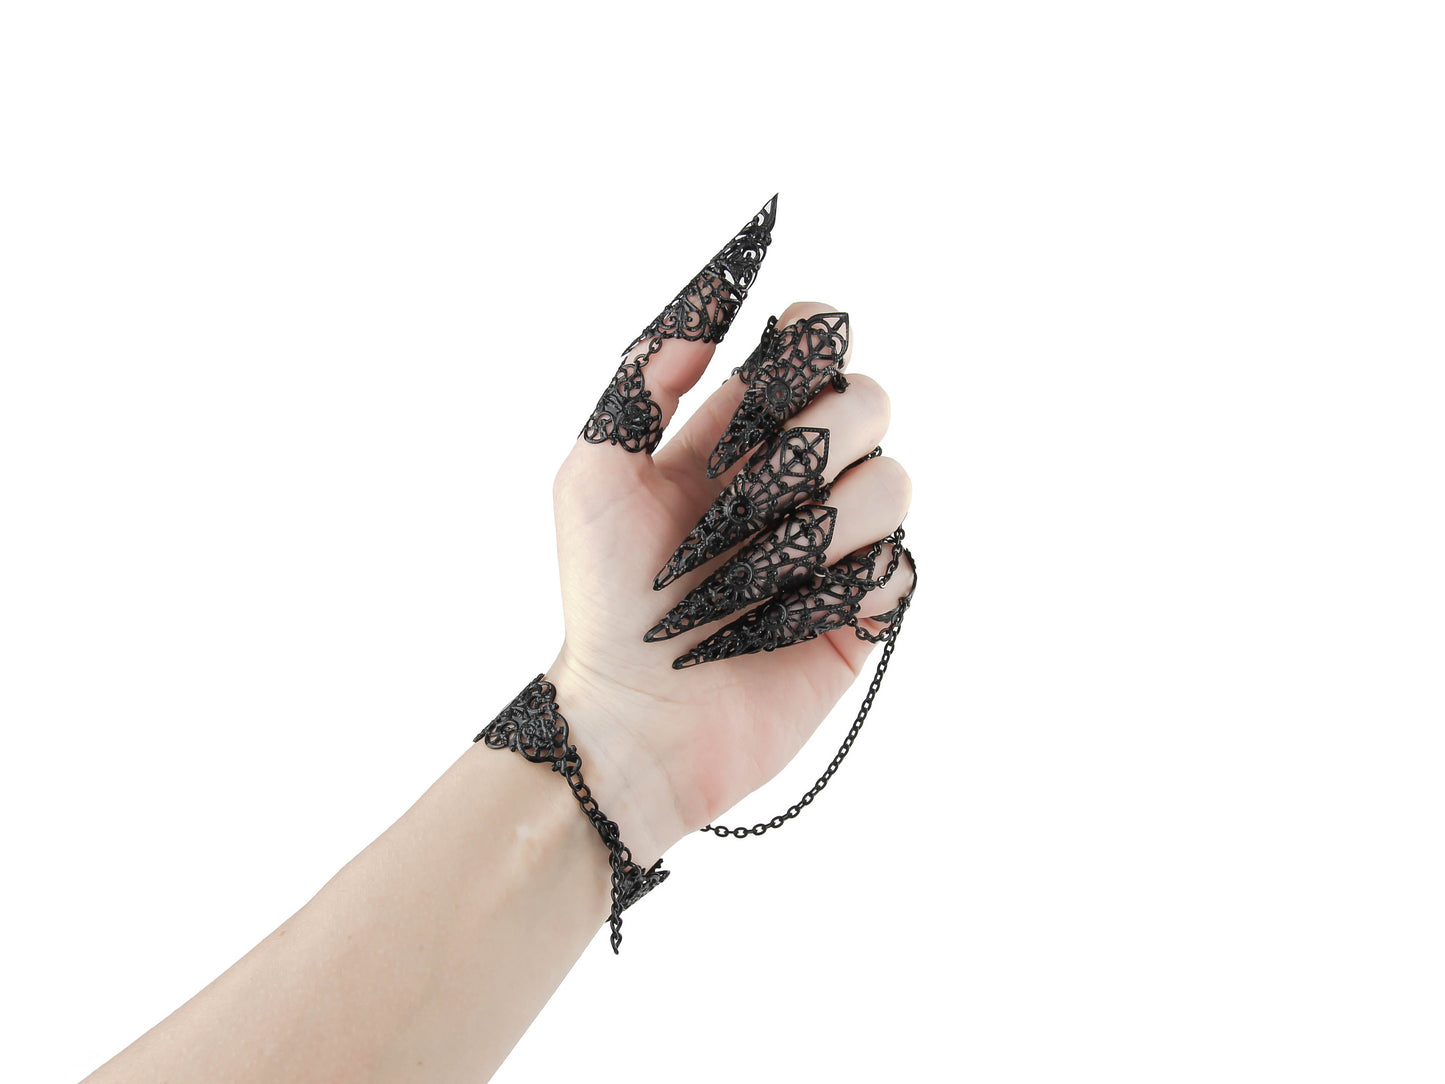 Focus on the claw rings of a hand adorned with black claw rings connected by delicate chains to the bracelt part, showcasing a gothic jewelry style with intricate filigree, perfect for a bold gothic or avant-garde fashion statement.